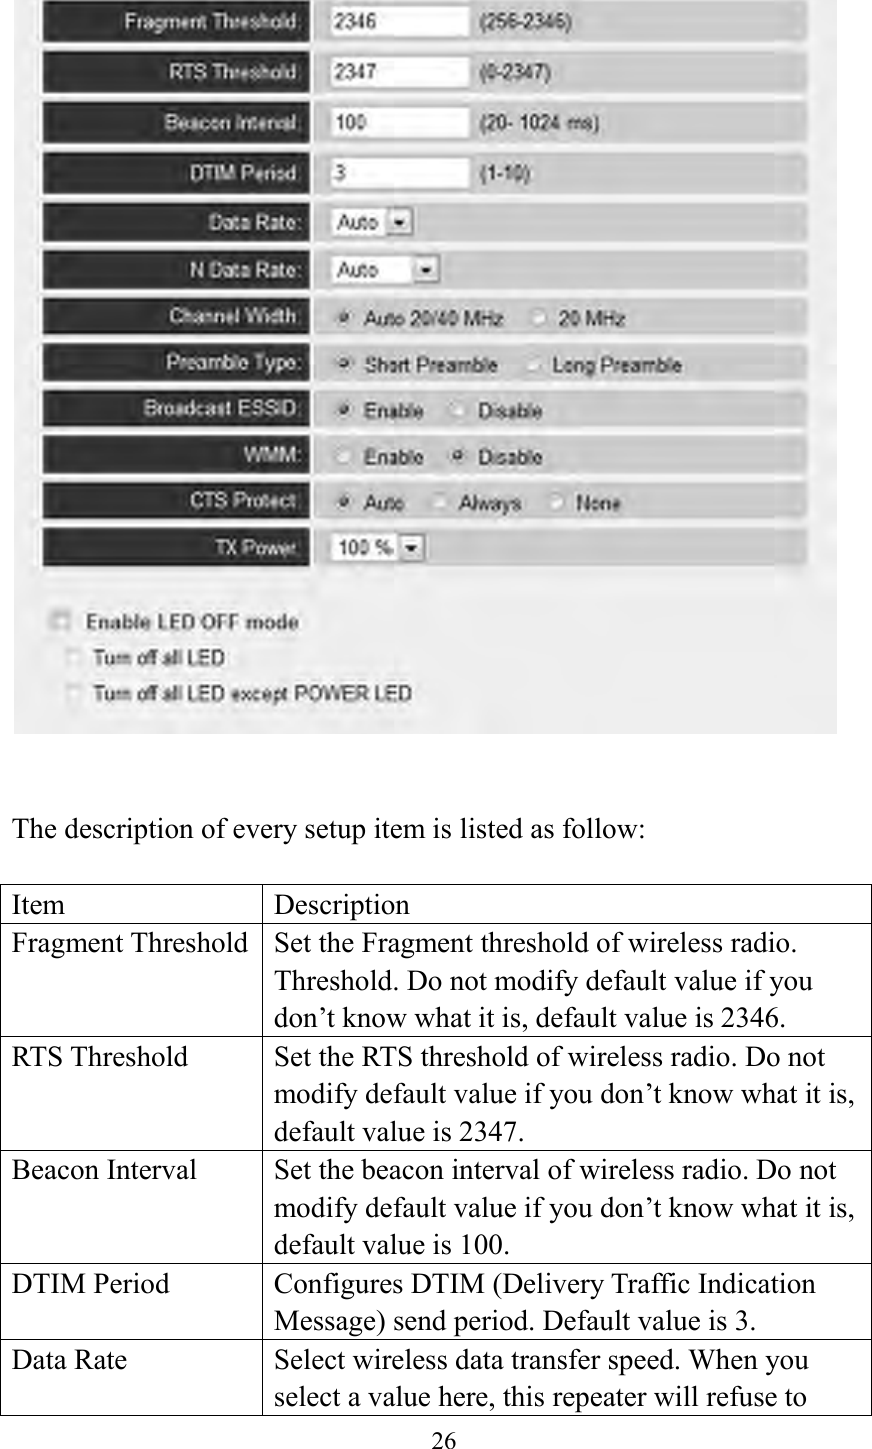  26     The description of every setup item is listed as follow:  Item Description Fragment Threshold Set the Fragment threshold of wireless radio. Threshold. Do not modify default value if you don’t know what it is, default value is 2346. RTS Threshold Set the RTS threshold of wireless radio. Do not modify default value if you don’t know what it is, default value is 2347. Beacon Interval Set the beacon interval of wireless radio. Do not modify default value if you don’t know what it is, default value is 100. DTIM Period Configures DTIM (Delivery Traffic Indication Message) send period. Default value is 3. Data Rate Select wireless data transfer speed. When you select a value here, this repeater will refuse to 